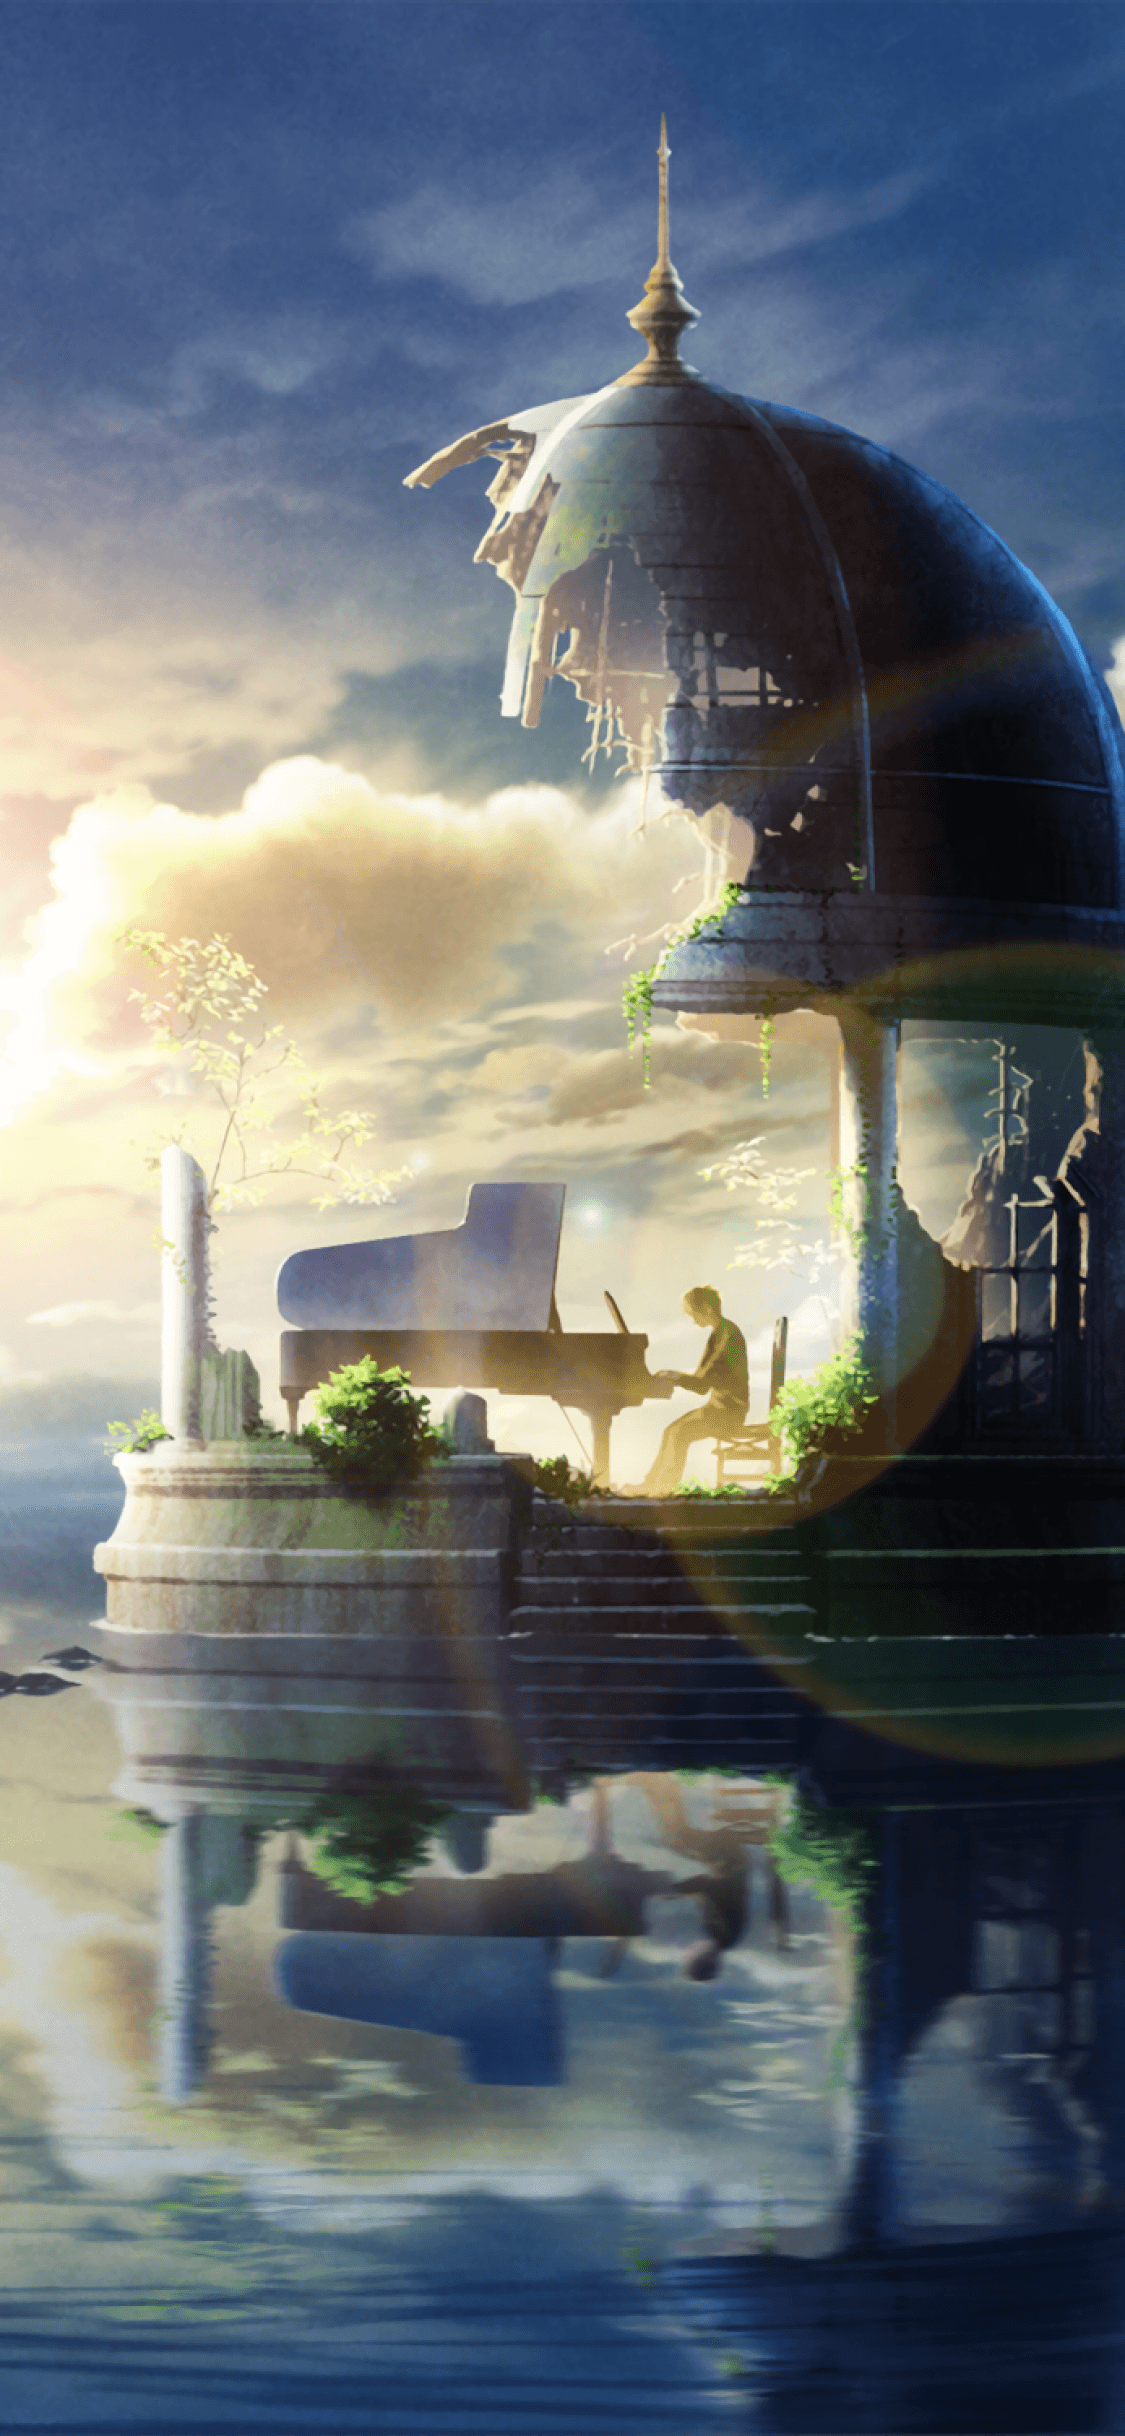 1125x2436 Download 1125x2436 Anime Boy, Playing Piano, Clouds, Lens Flare, Instrument Wallpaper for iPhone X on WallpaperBat